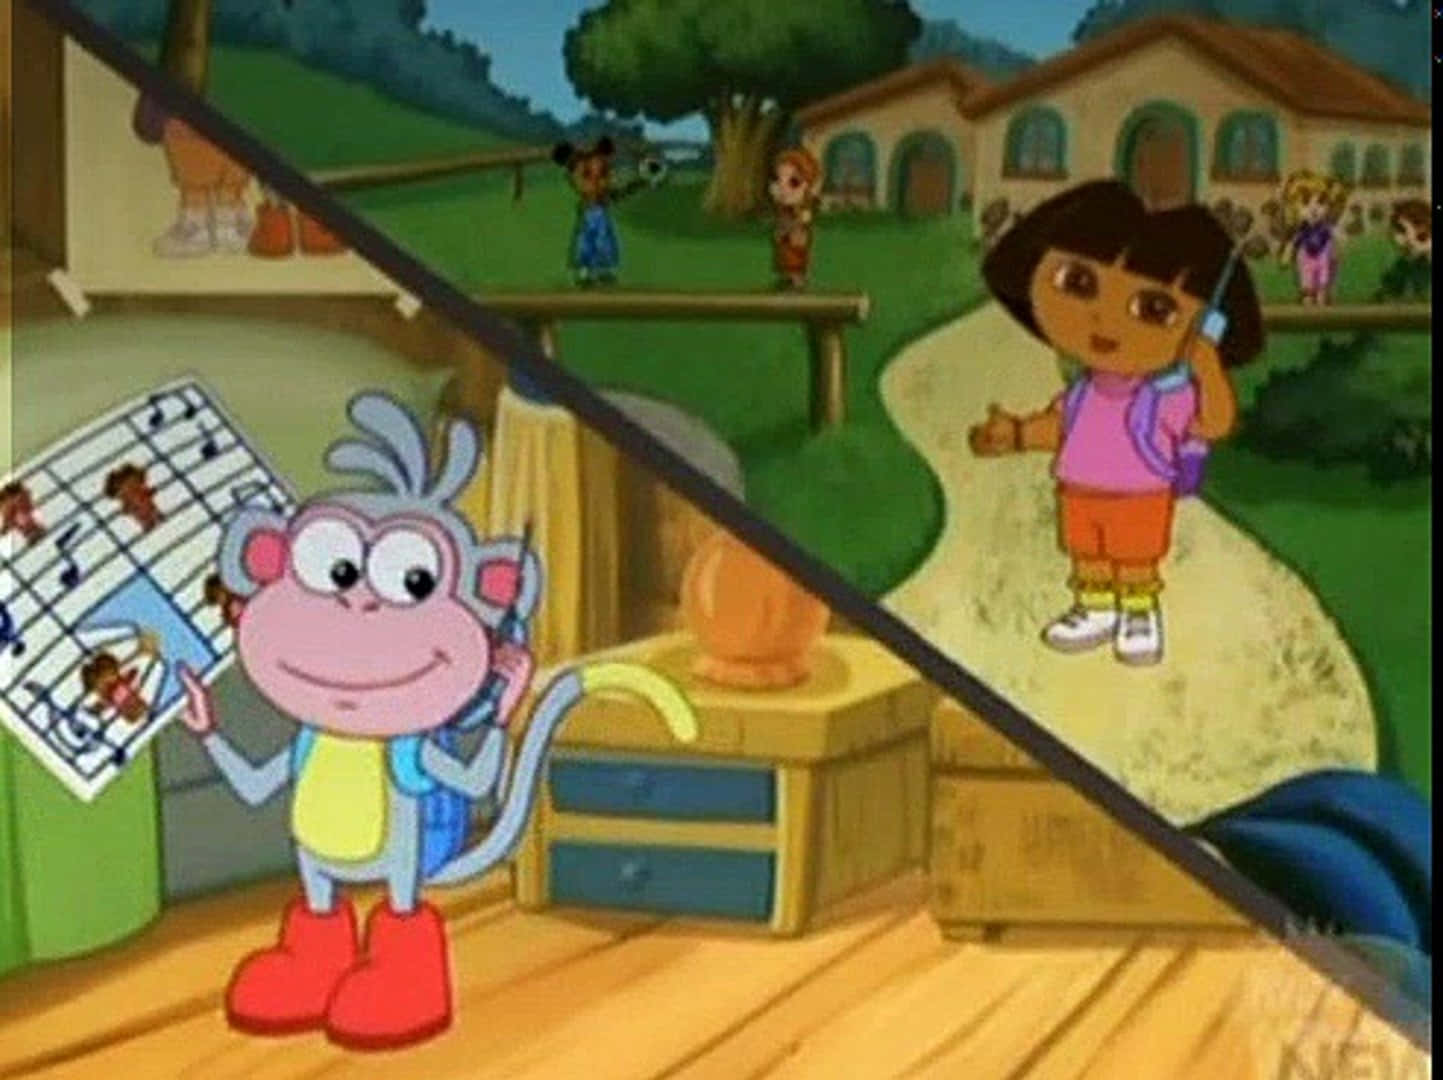 "Exploring A World Of Adventure With Dora!"